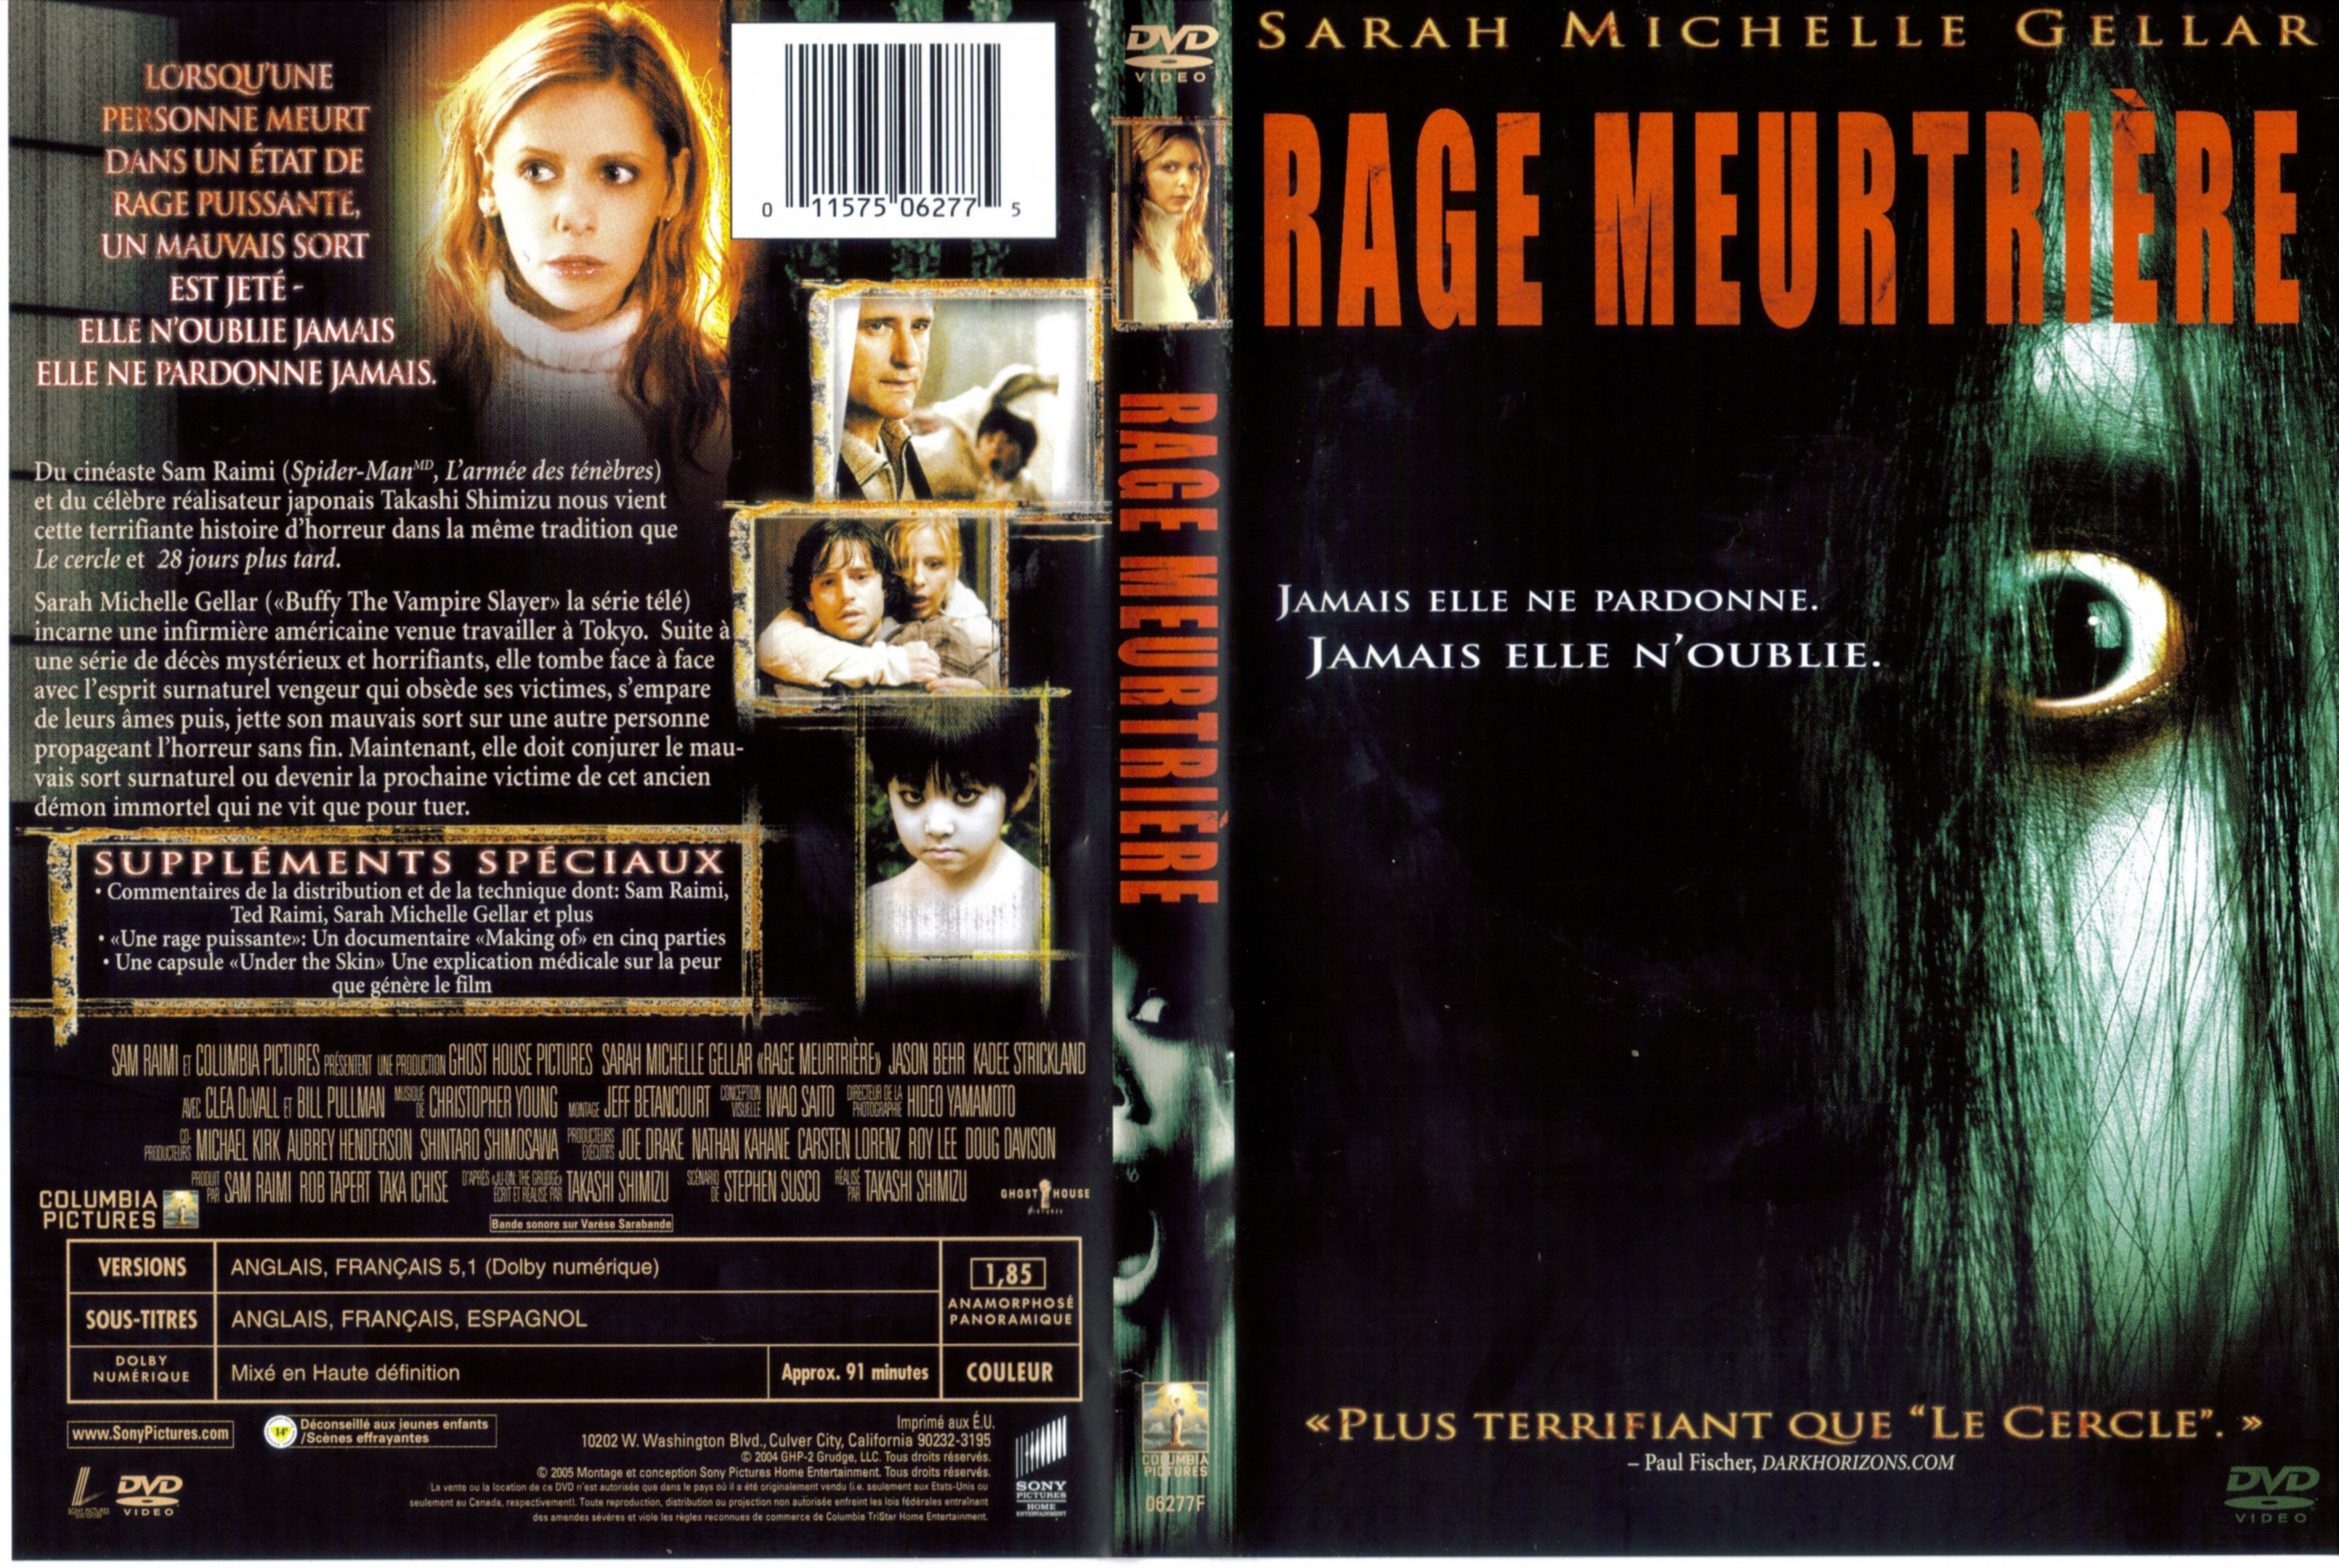 Jaquette DVD Rage meurtrire (Canadienne)